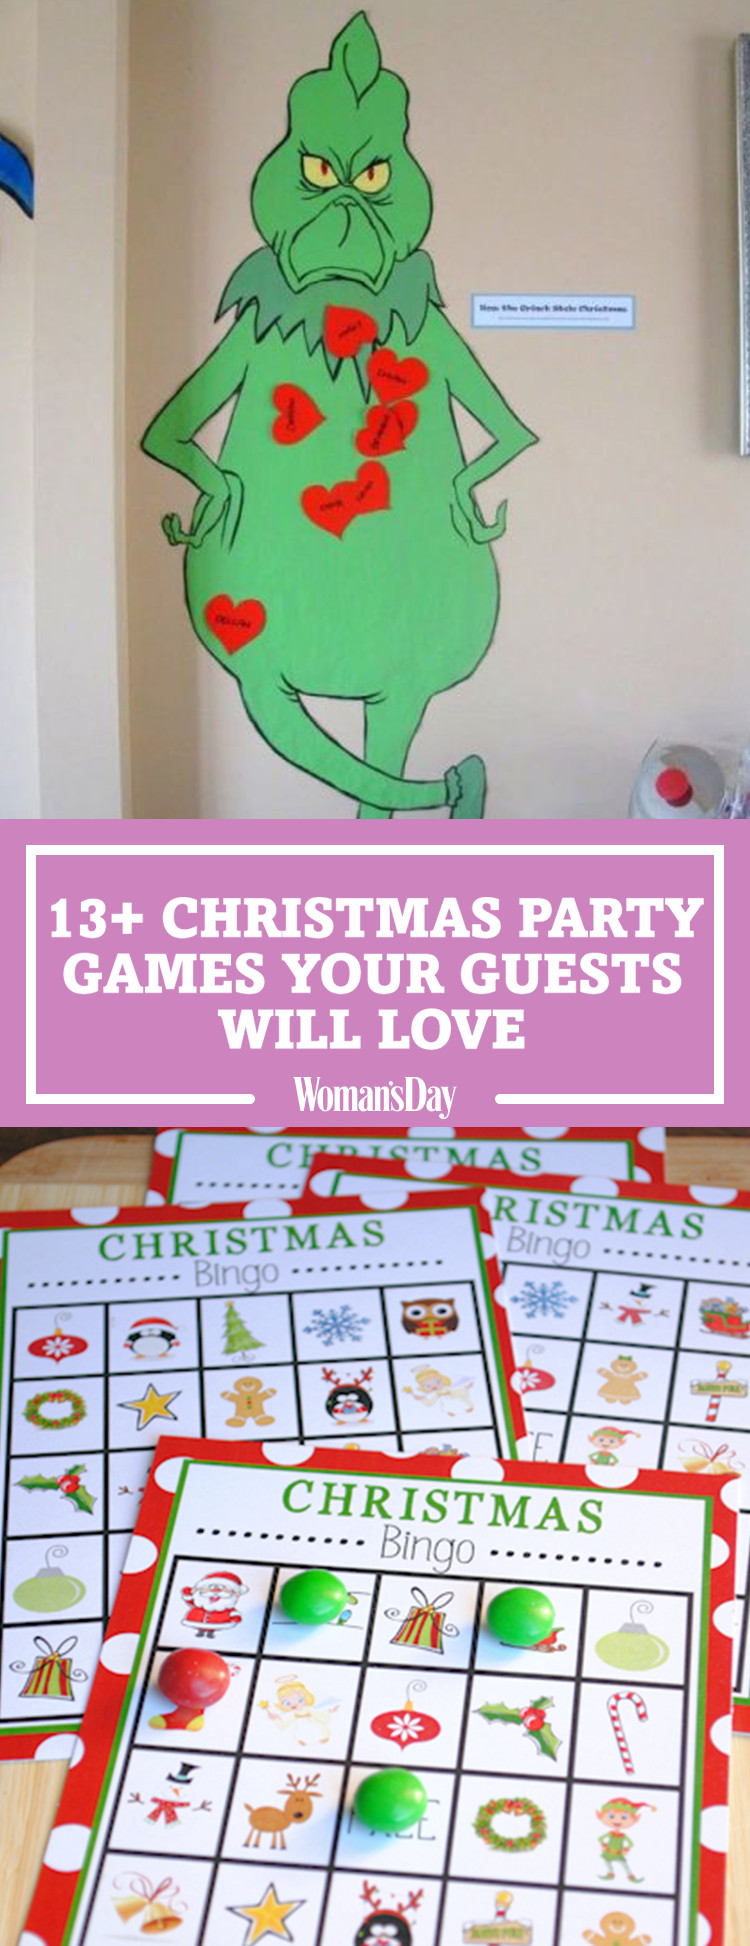 Holiday Party Game Ideas For Work
 17 Fun Christmas Party Games for Kids DIY Holiday Party